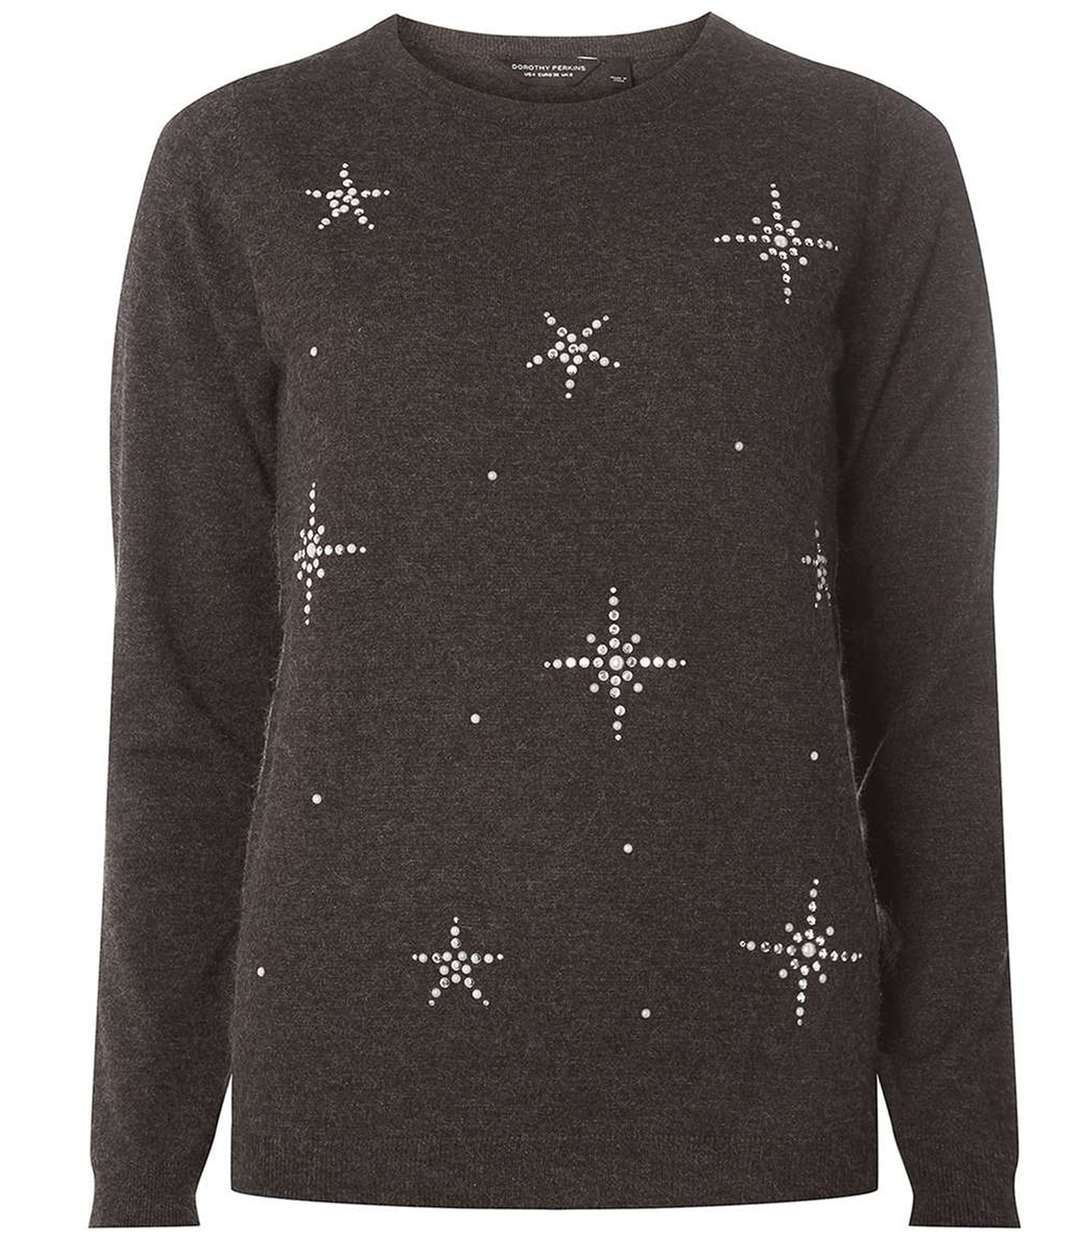 Charcoal Snowflake Embellished Jumper, £26, available from Dorothy Perkins